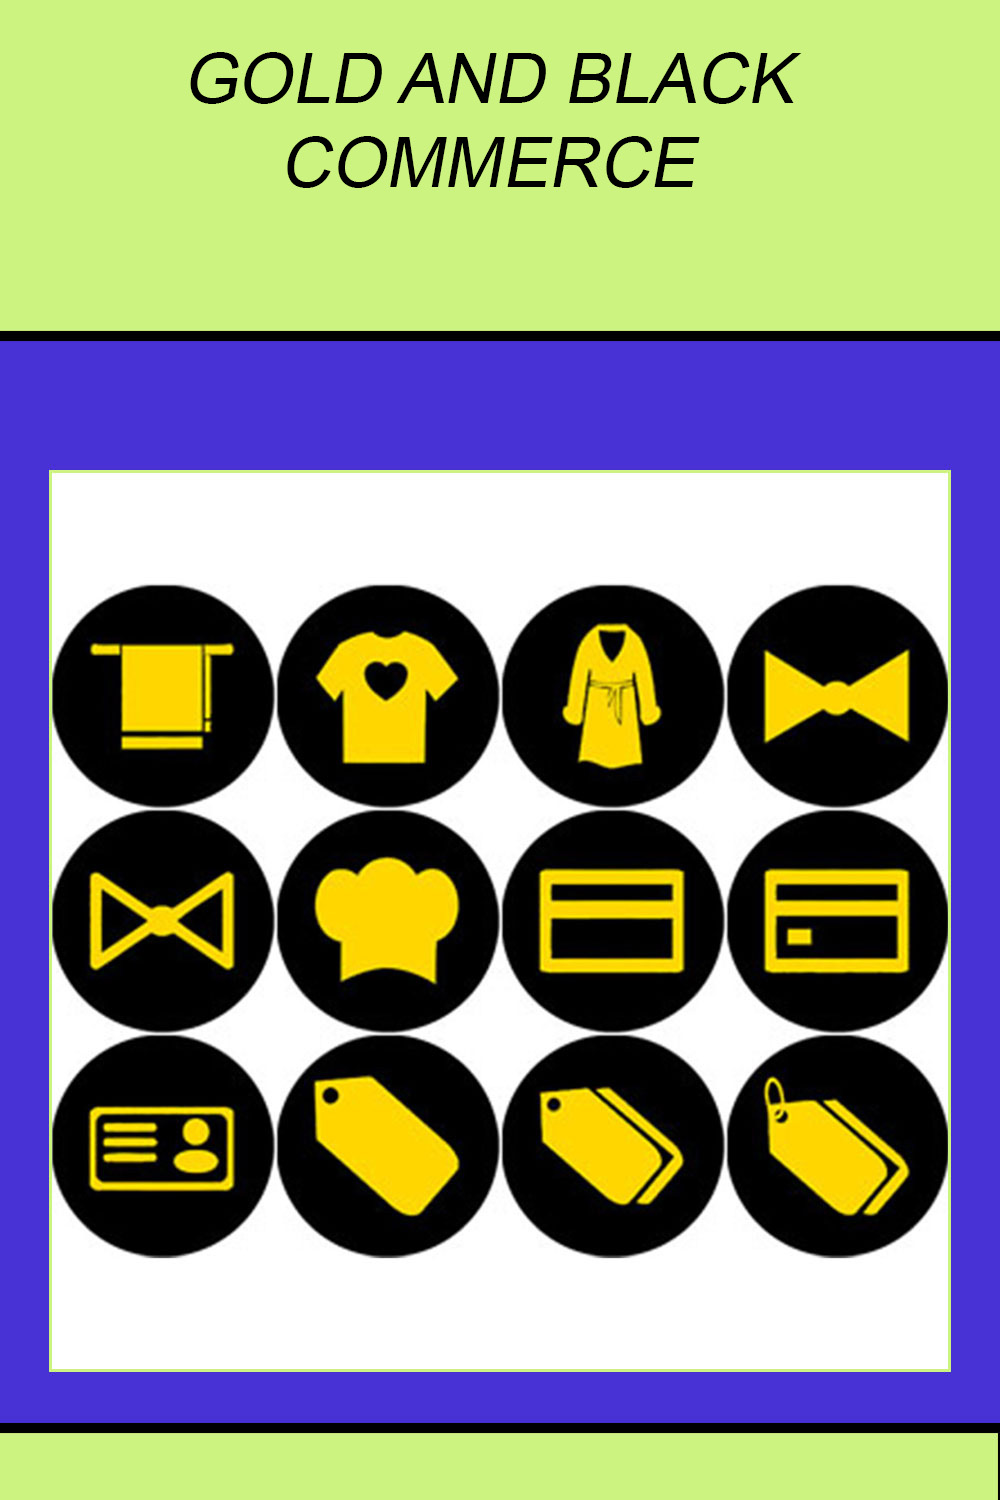 GOLD AND BLACK COMMERCE ICONS pinterest preview image.